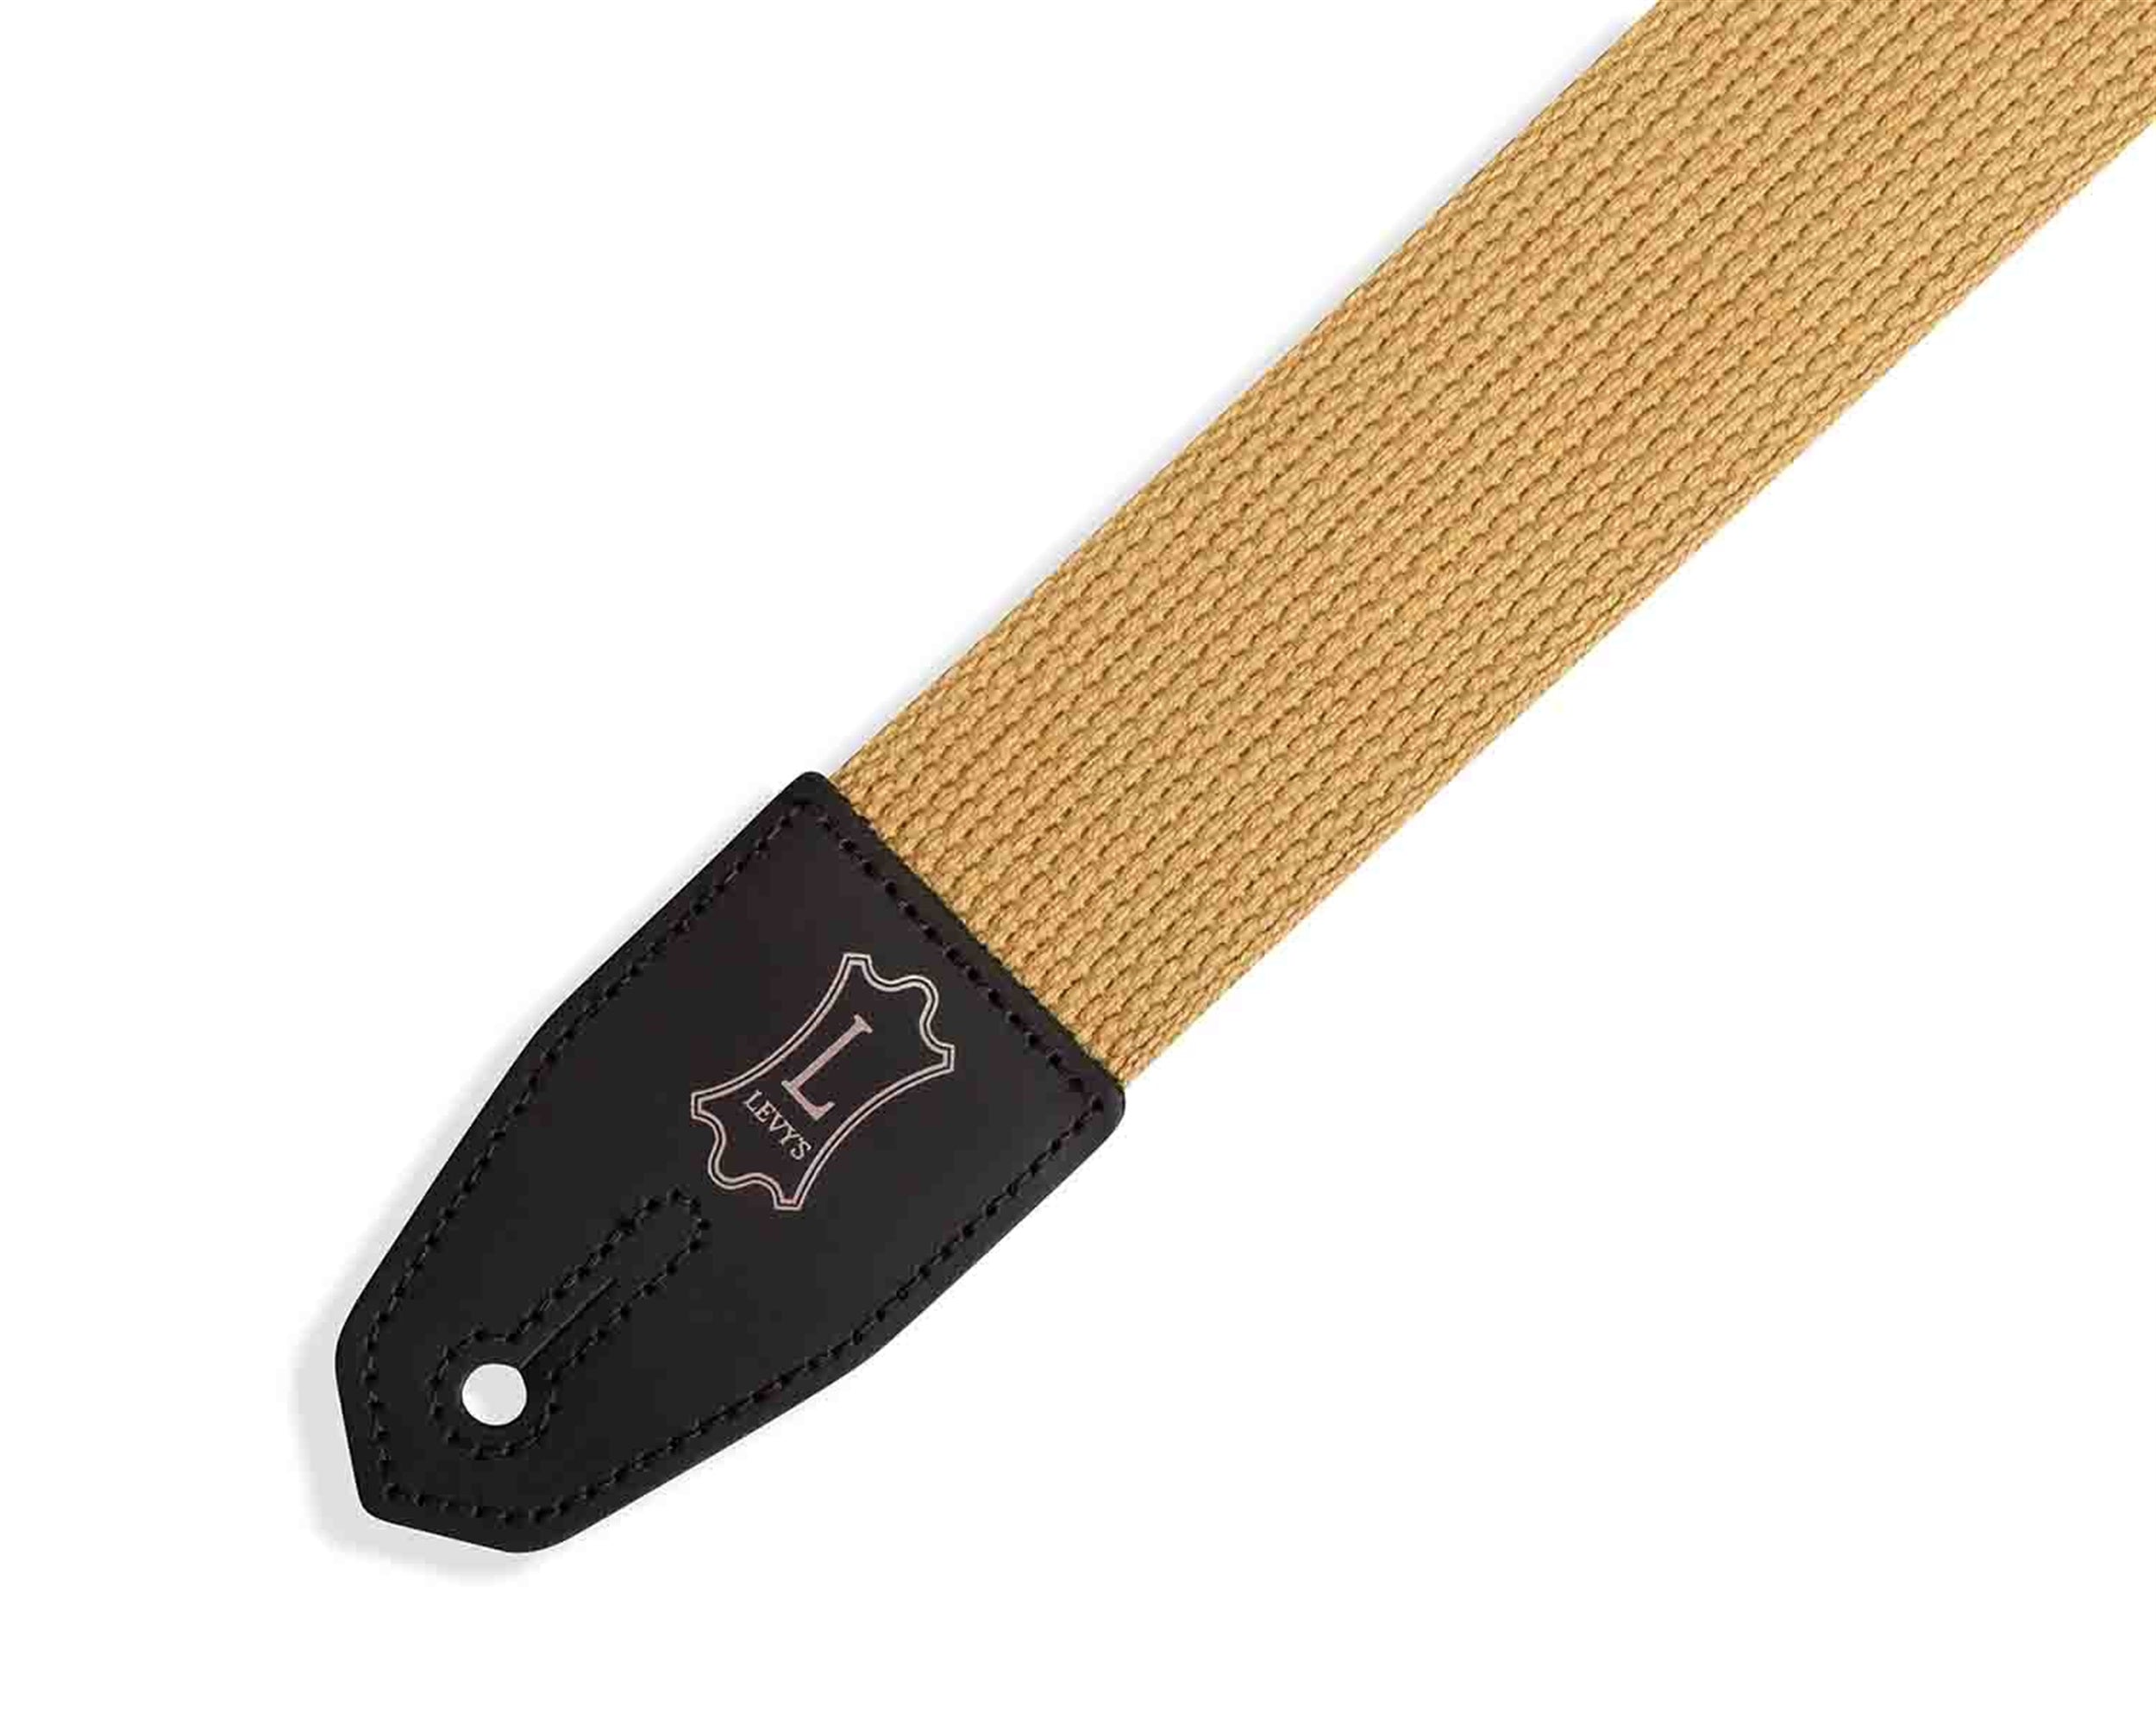 Levy's Leathers MRHC-TAN 3 inch Right Height Tan Cotton Leather Guitar Strap - Tan - Hollywood DJ